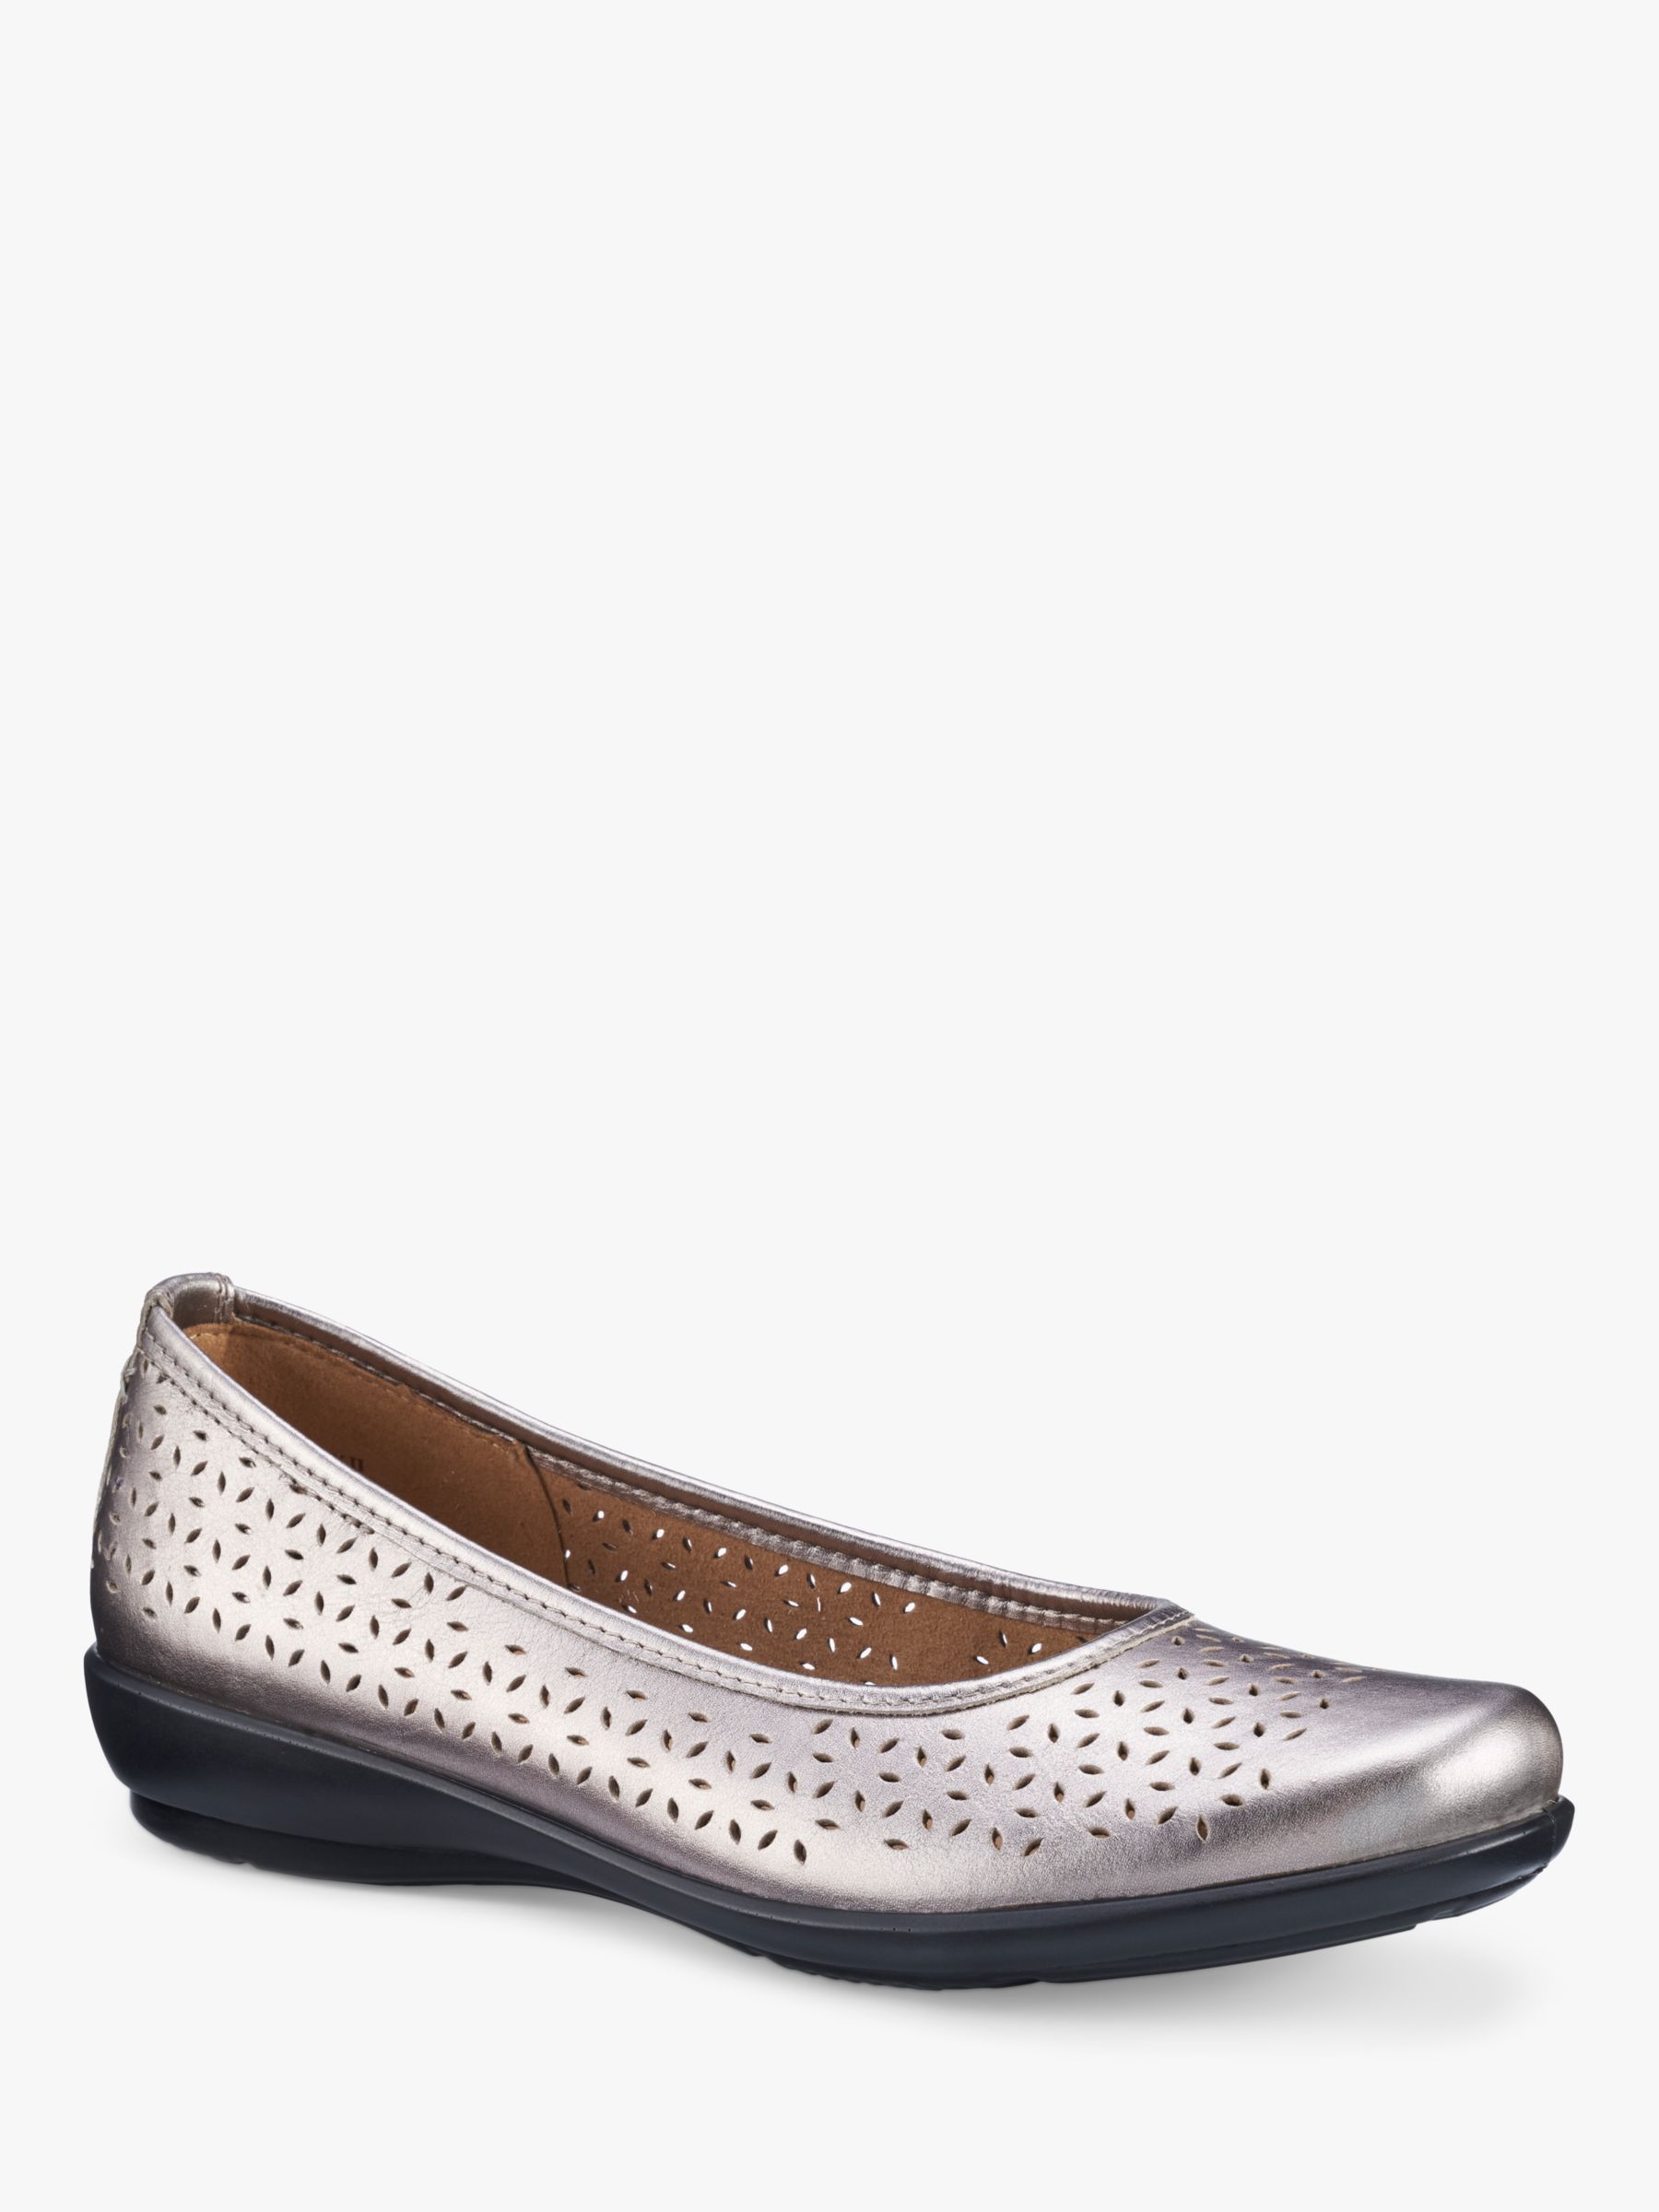 Buy Hotter Livvy II Perforated Leather Pumps, Pewter Online at johnlewis.com